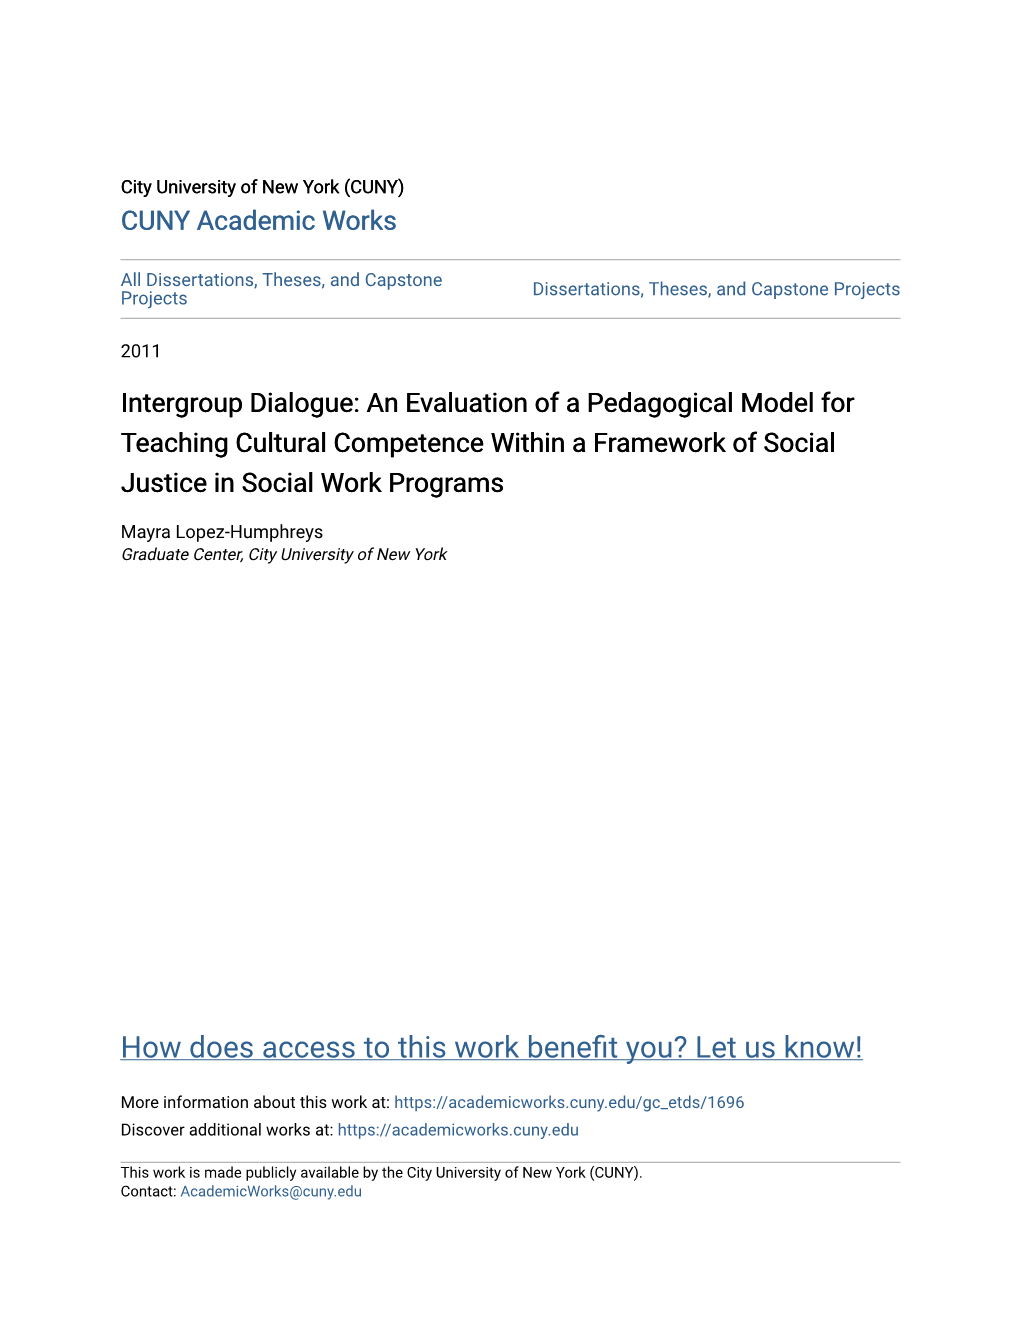 Intergroup Dialogue: an Evaluation of a Pedagogical Model for Teaching Cultural Competence Within a Framework of Social Justice in Social Work Programs